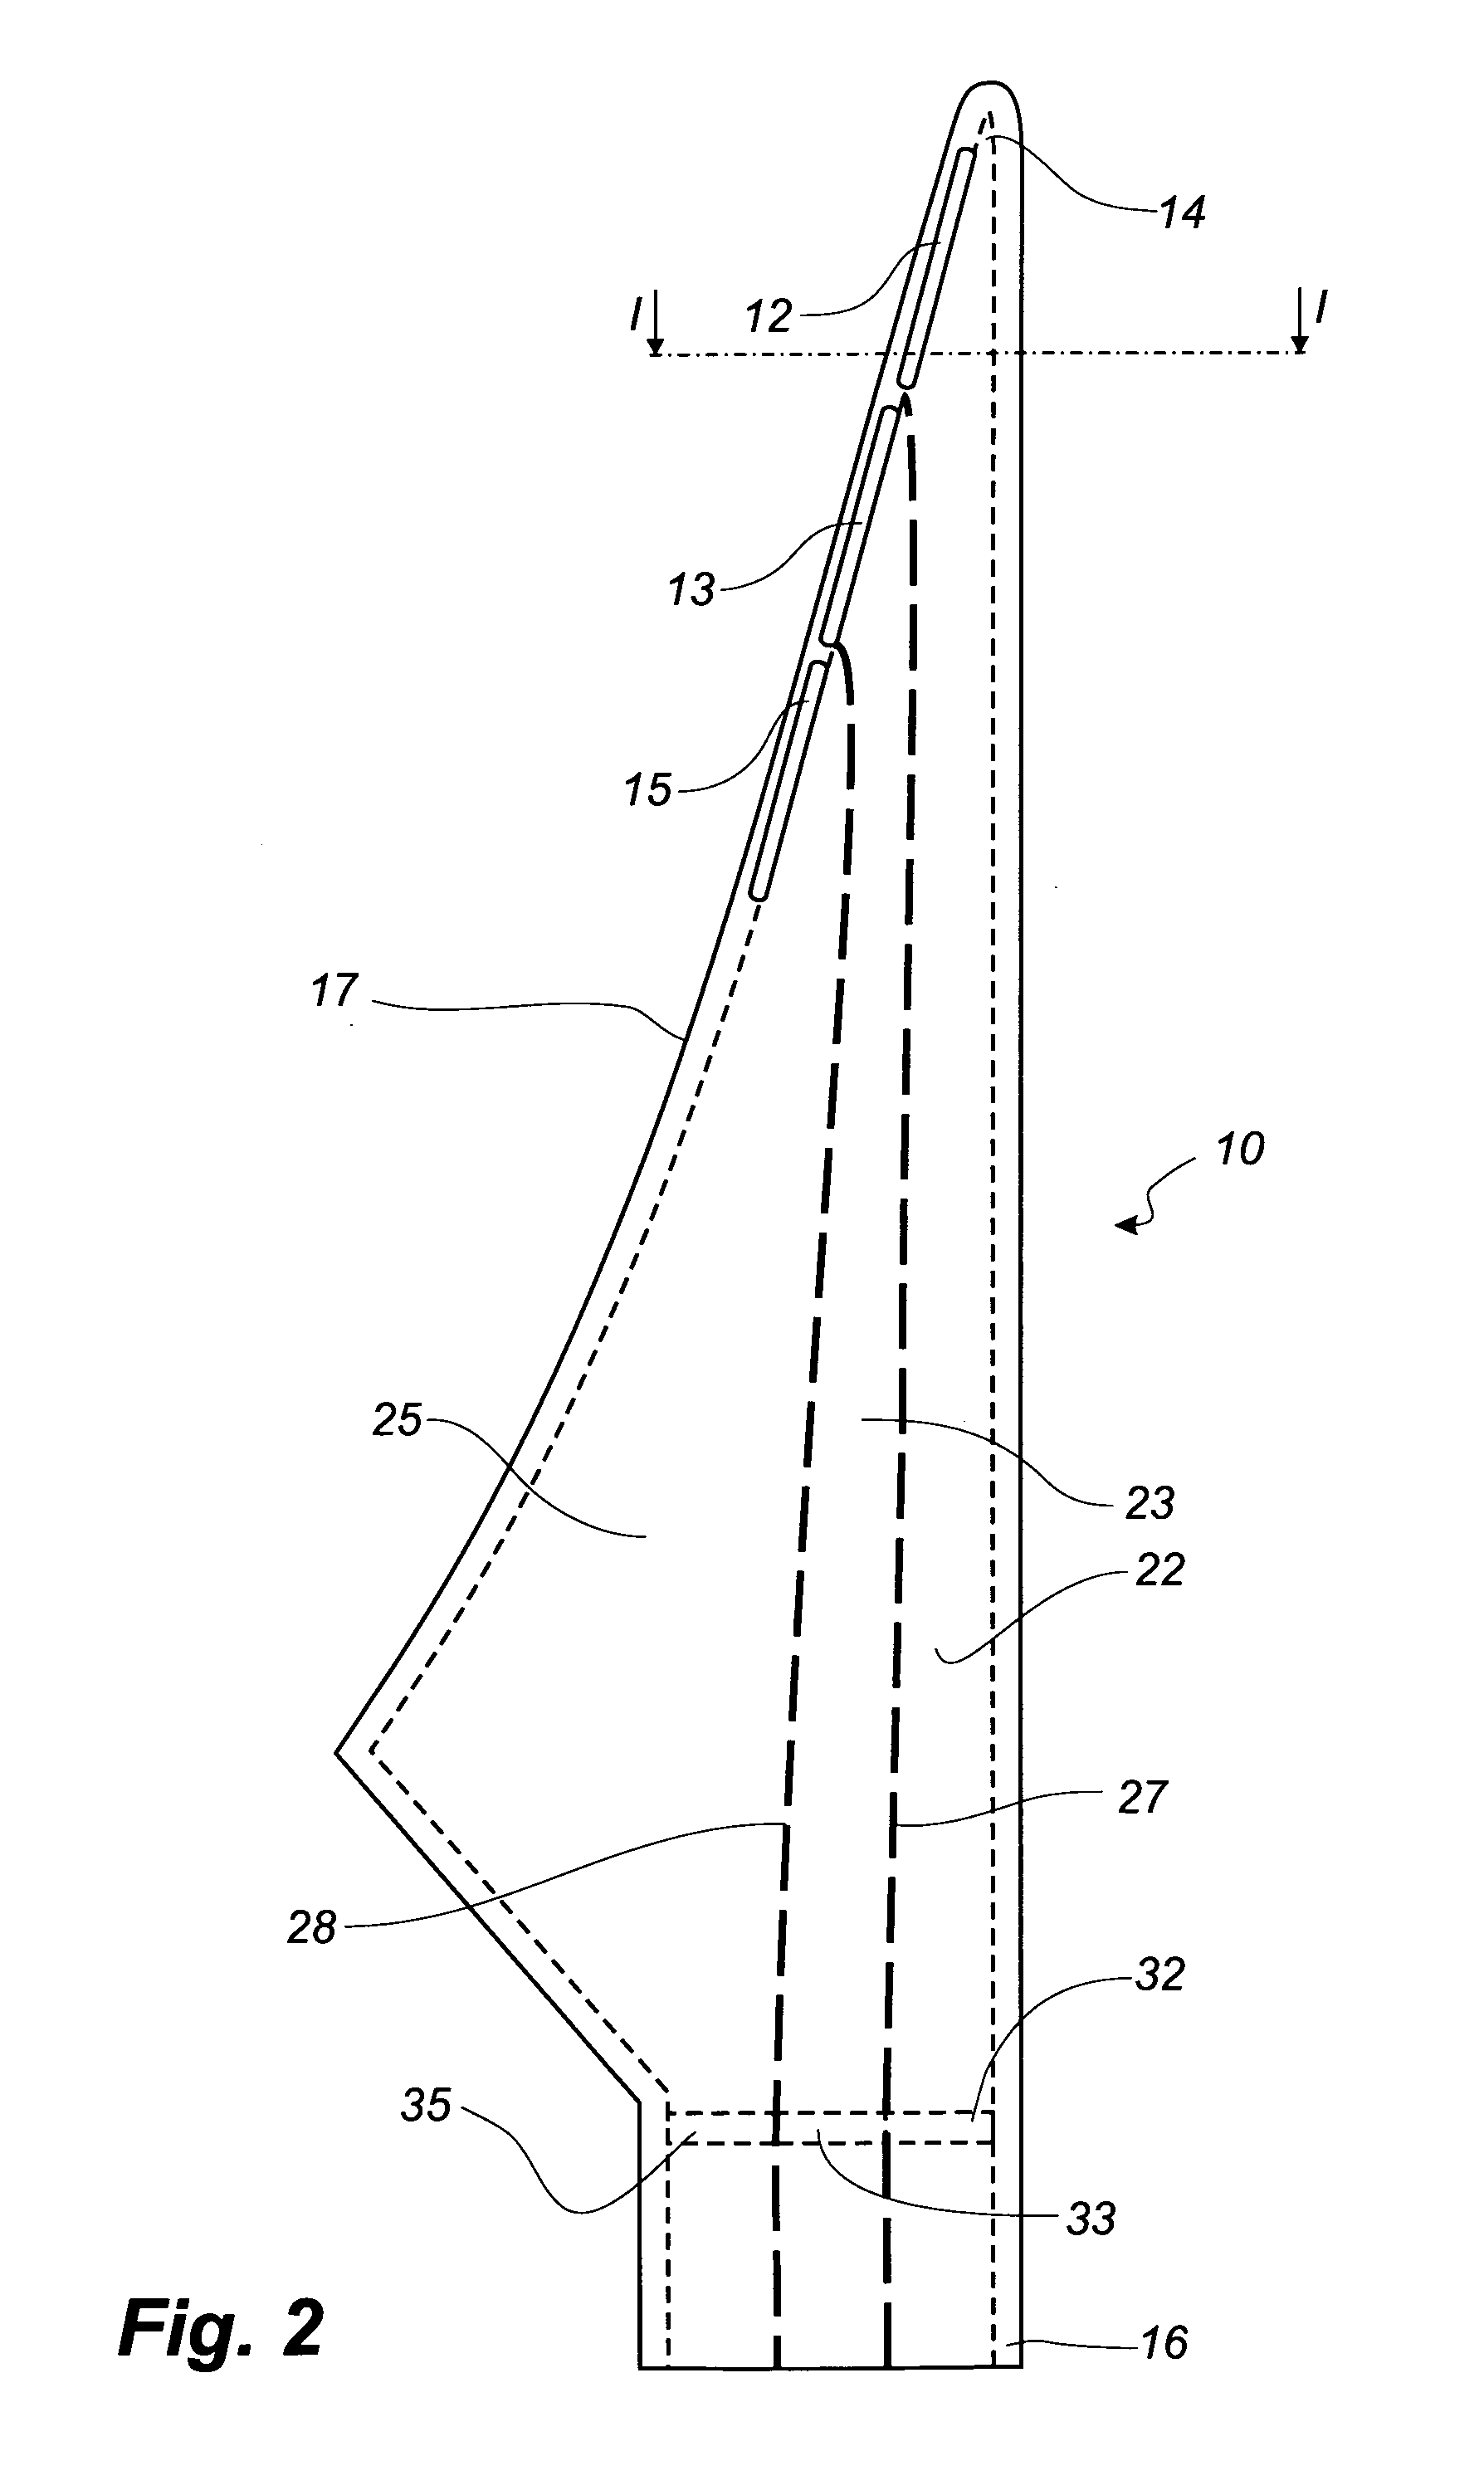 Wind turbine blade with lift-regulating means in form of slots or holes